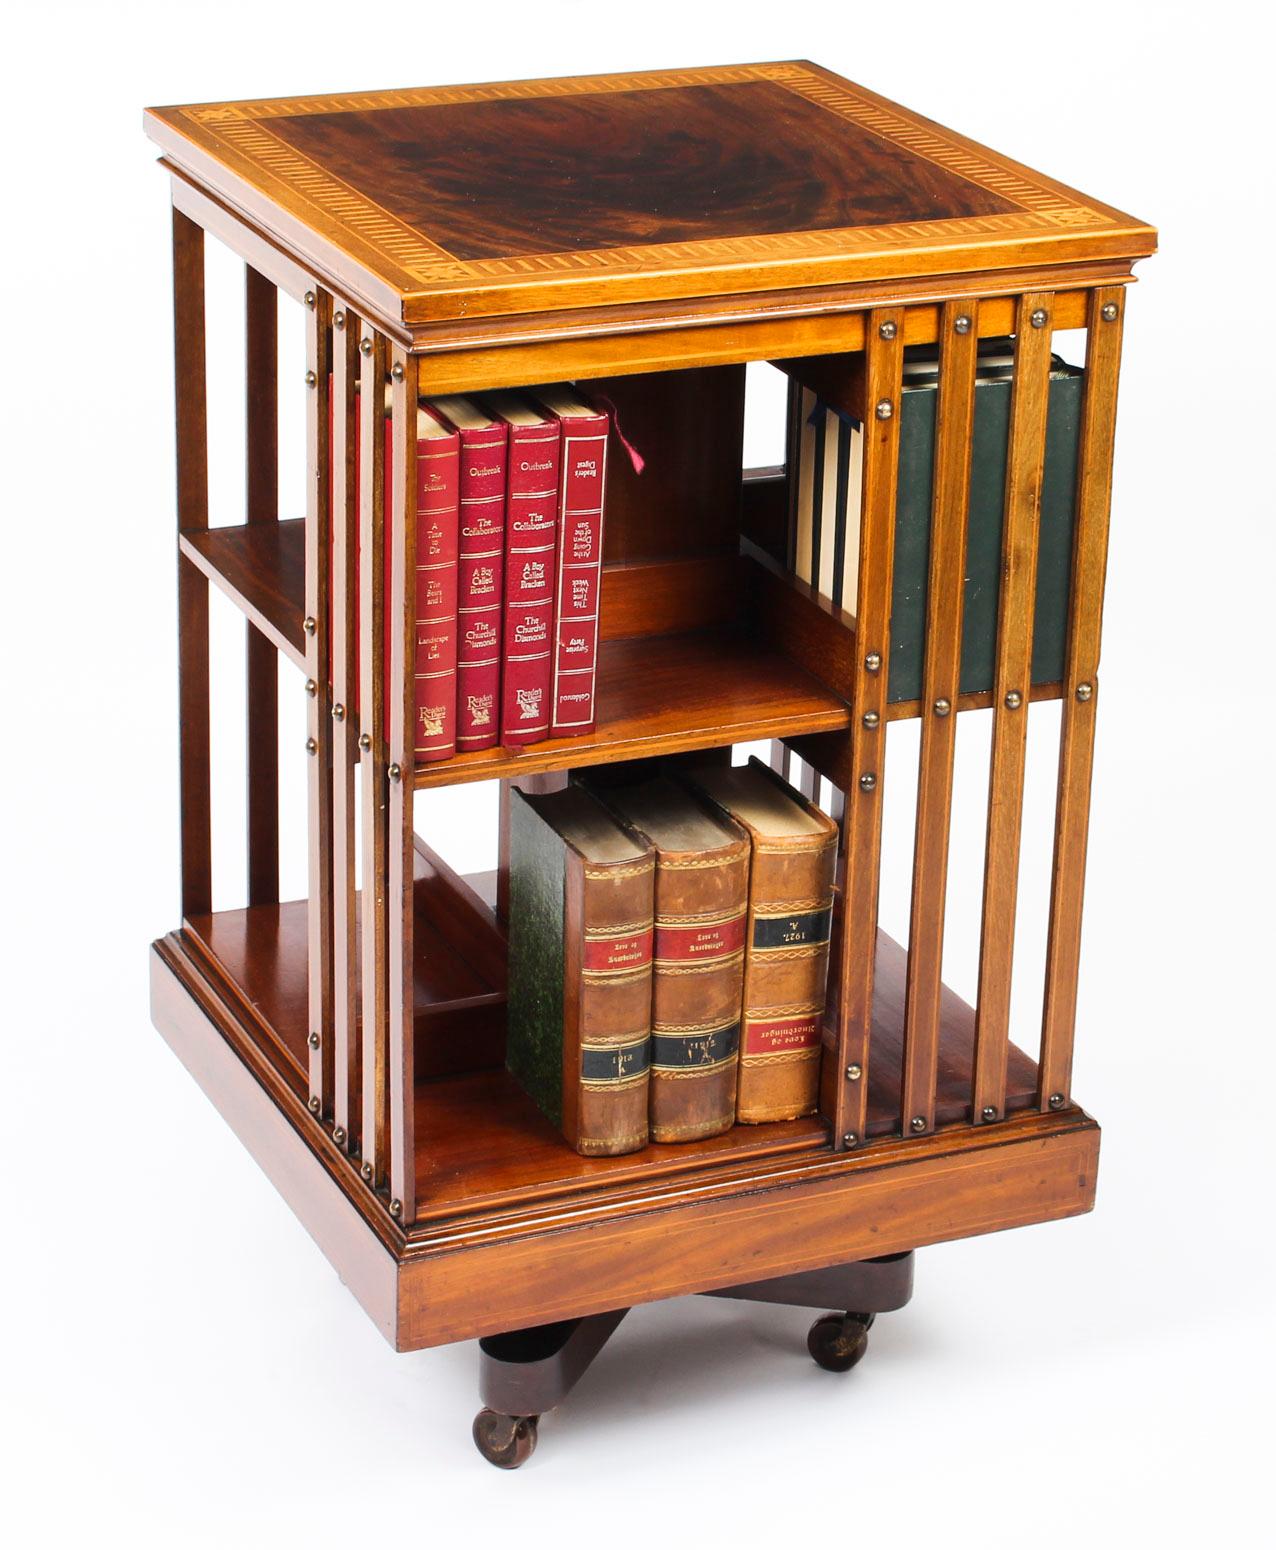 This an exquisite antique revolving bookcase attributed to the renowned retailer and manufacturer Maple & Co., circa 1890 in date.

It is made of mahogany , revolves on a solid cast iron base, the top with flame mahogany and an elaborate chequer